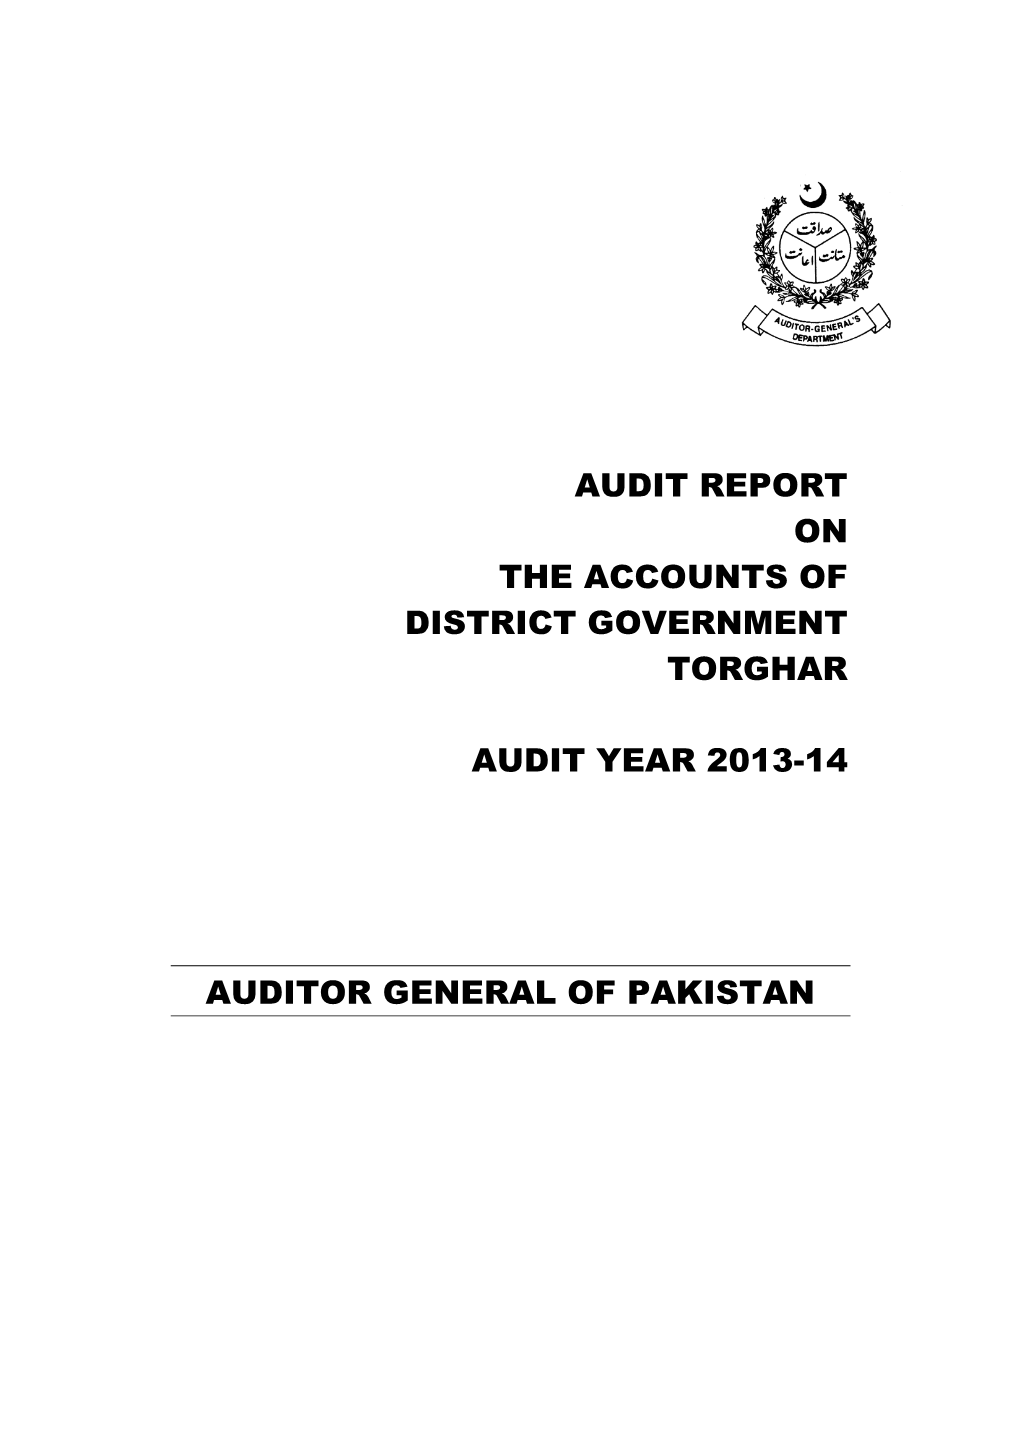 Audit Report on the Accounts of District Government Torghar Audit Year 2013